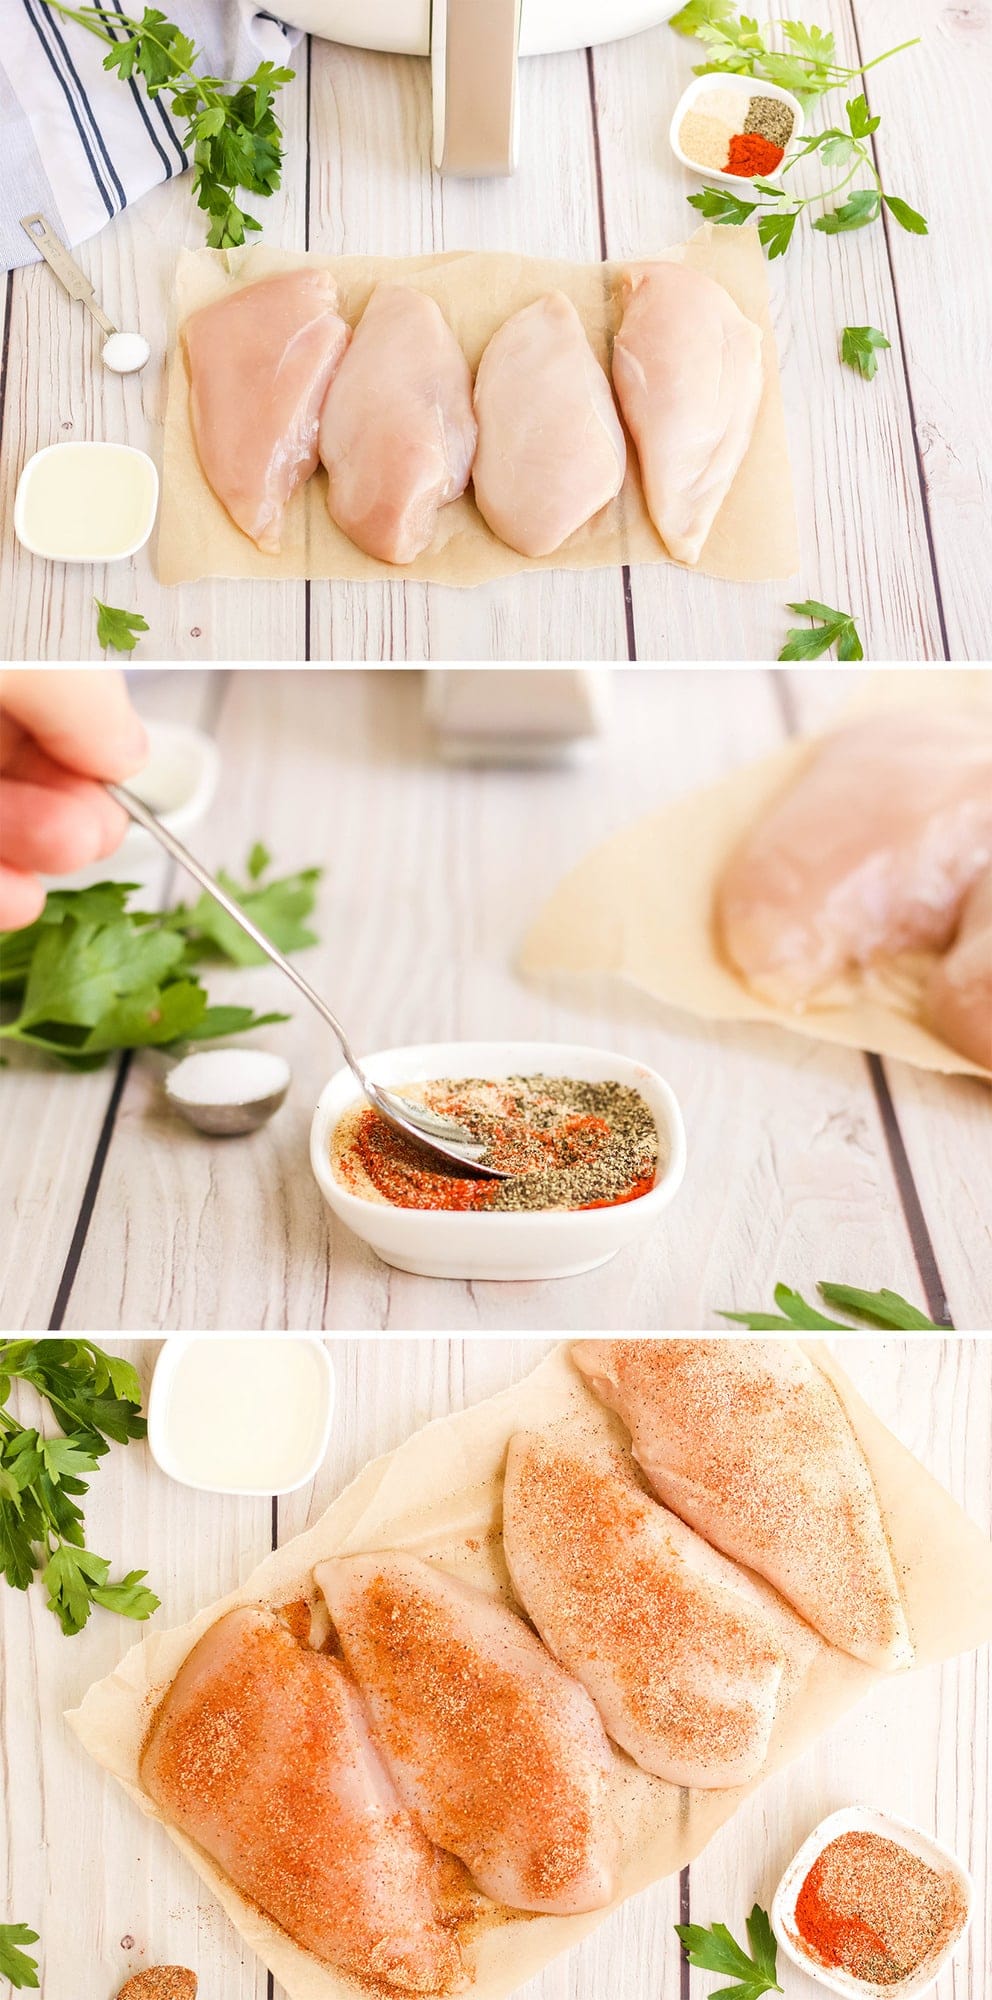 collage of three images showing raw chicken, a spice blend, and the chicken with the spices